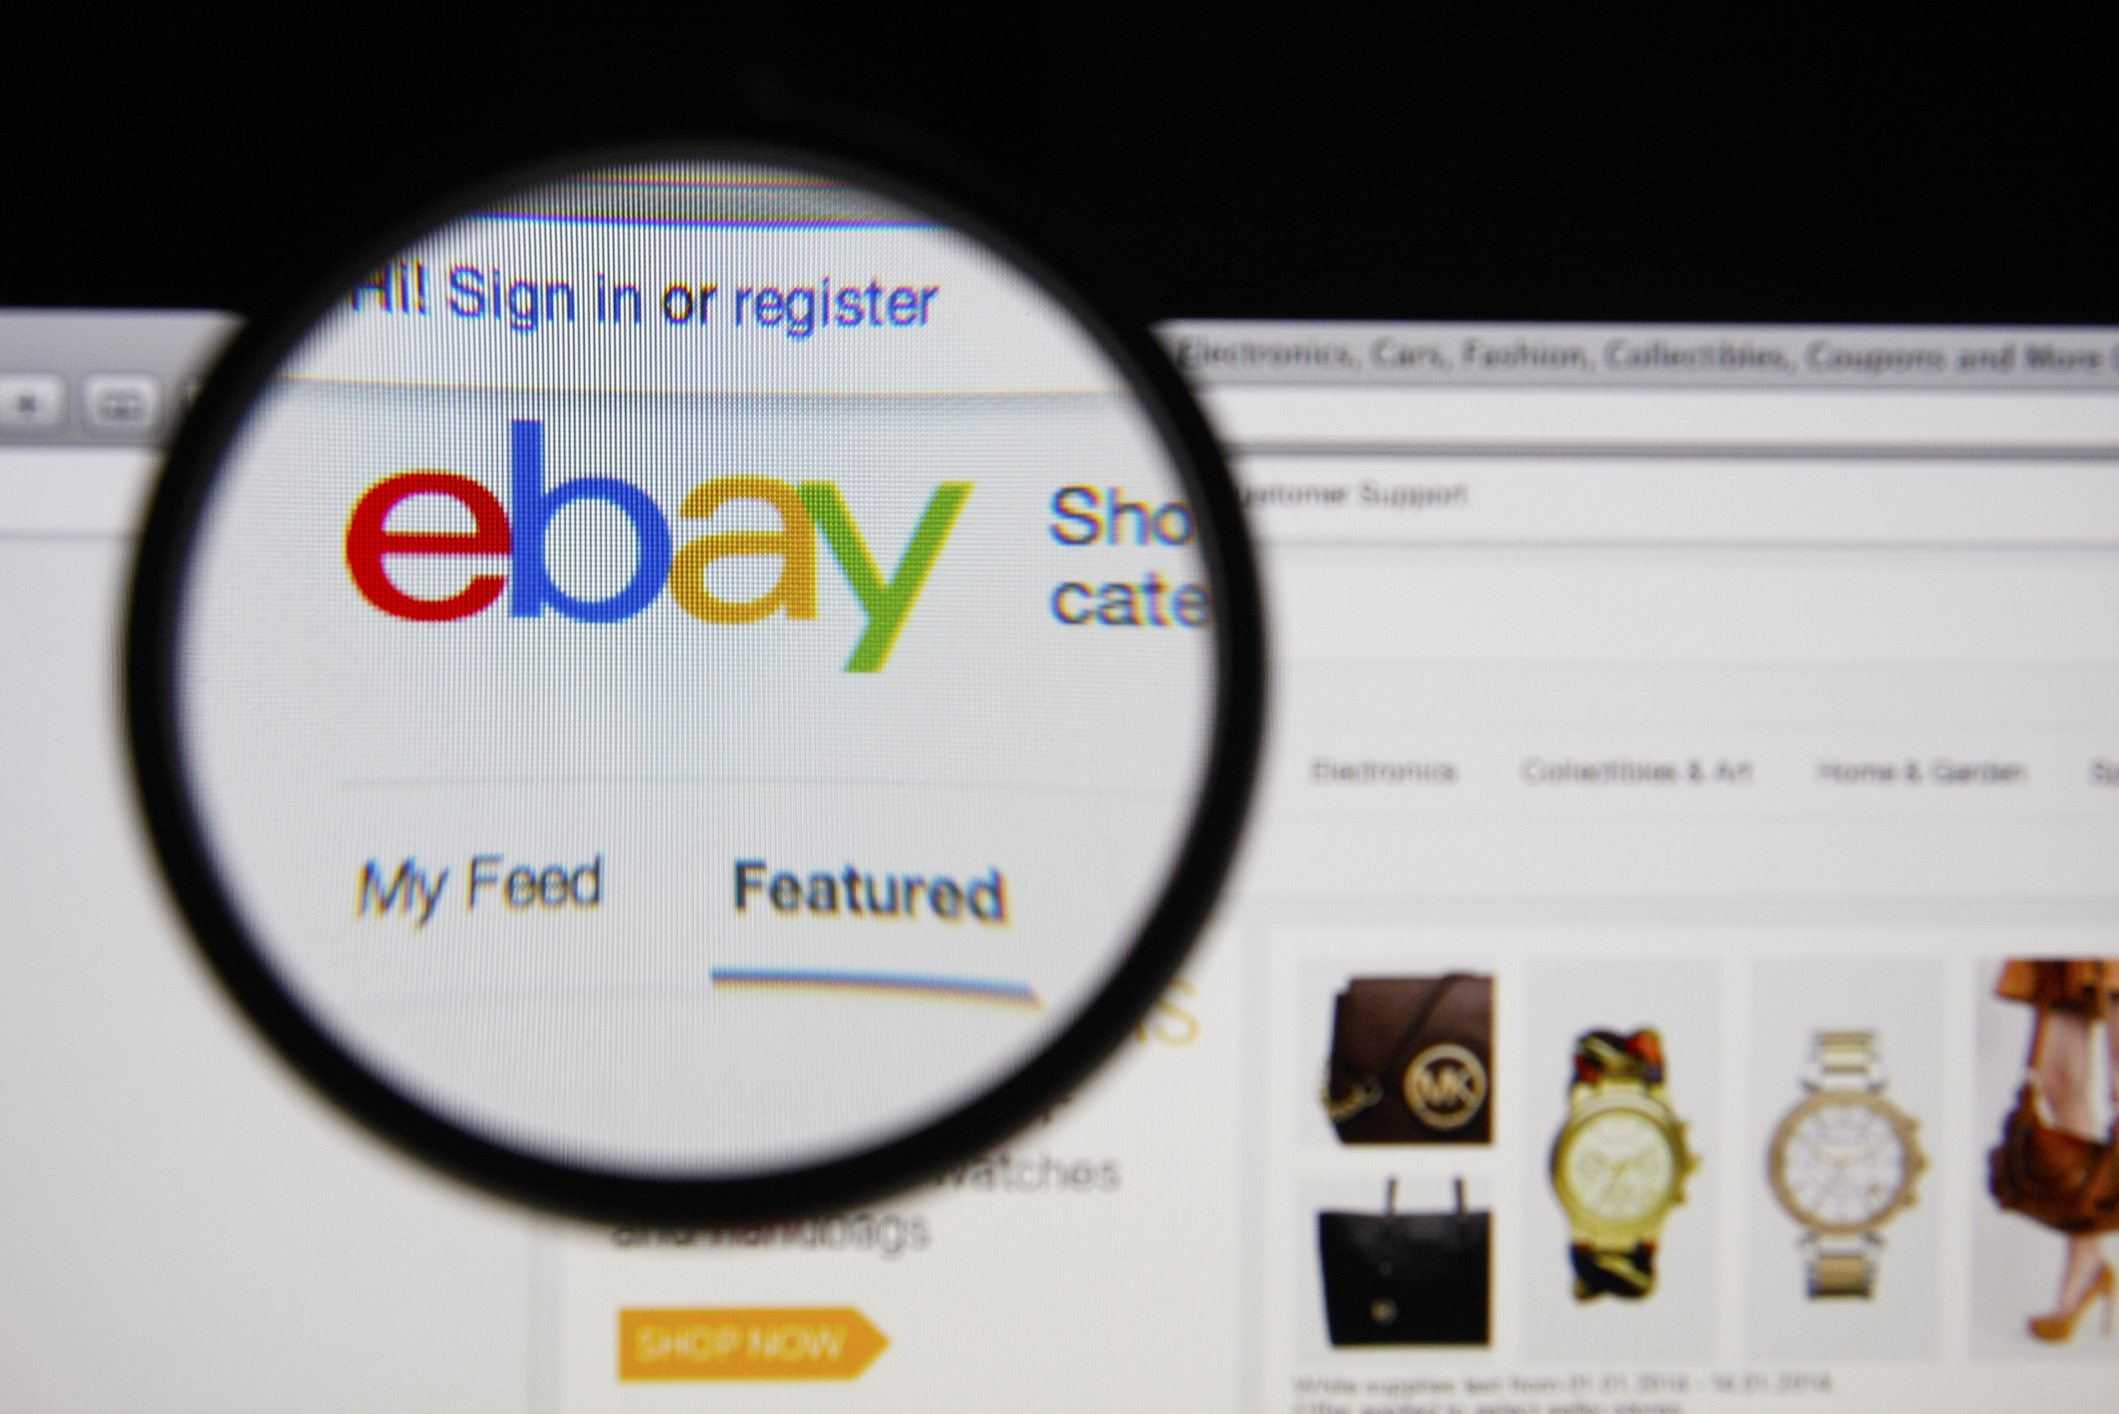 eBay coupons: is not currently offering promo codes at this time.